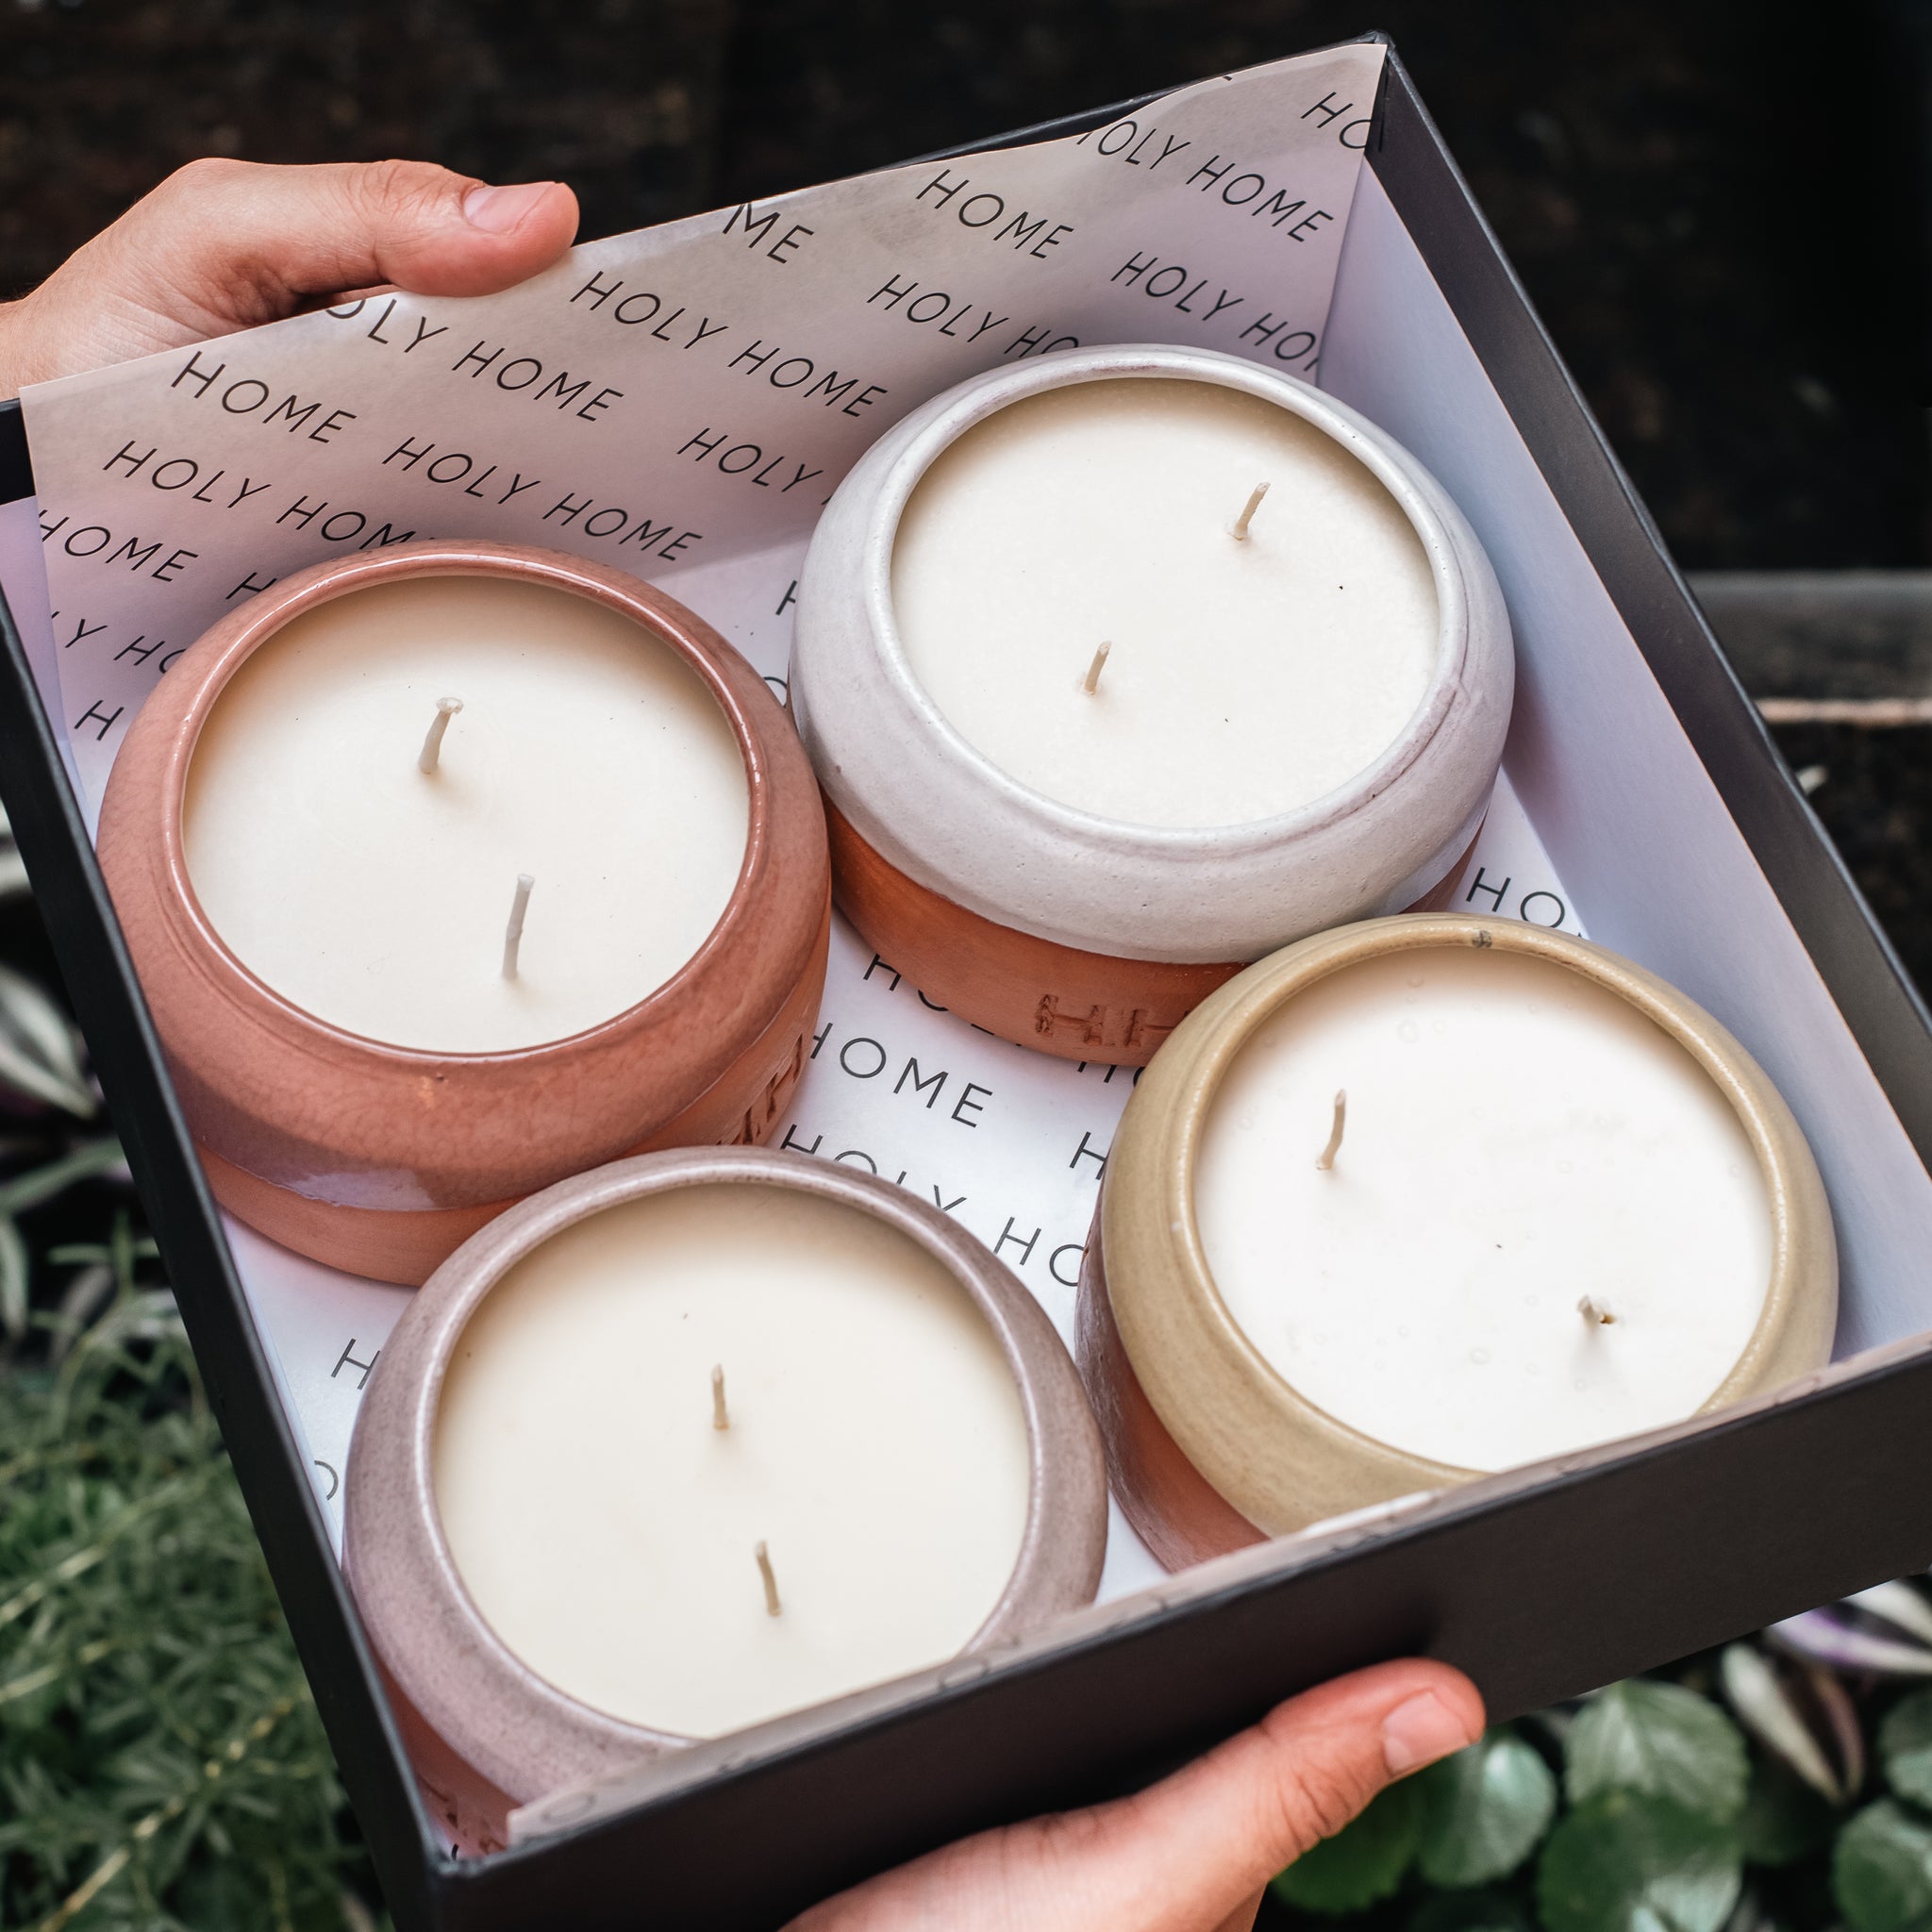 SECRET GARDEN BOX - 4 SCENTED CANDLES WITH NATURAL ESSENCES